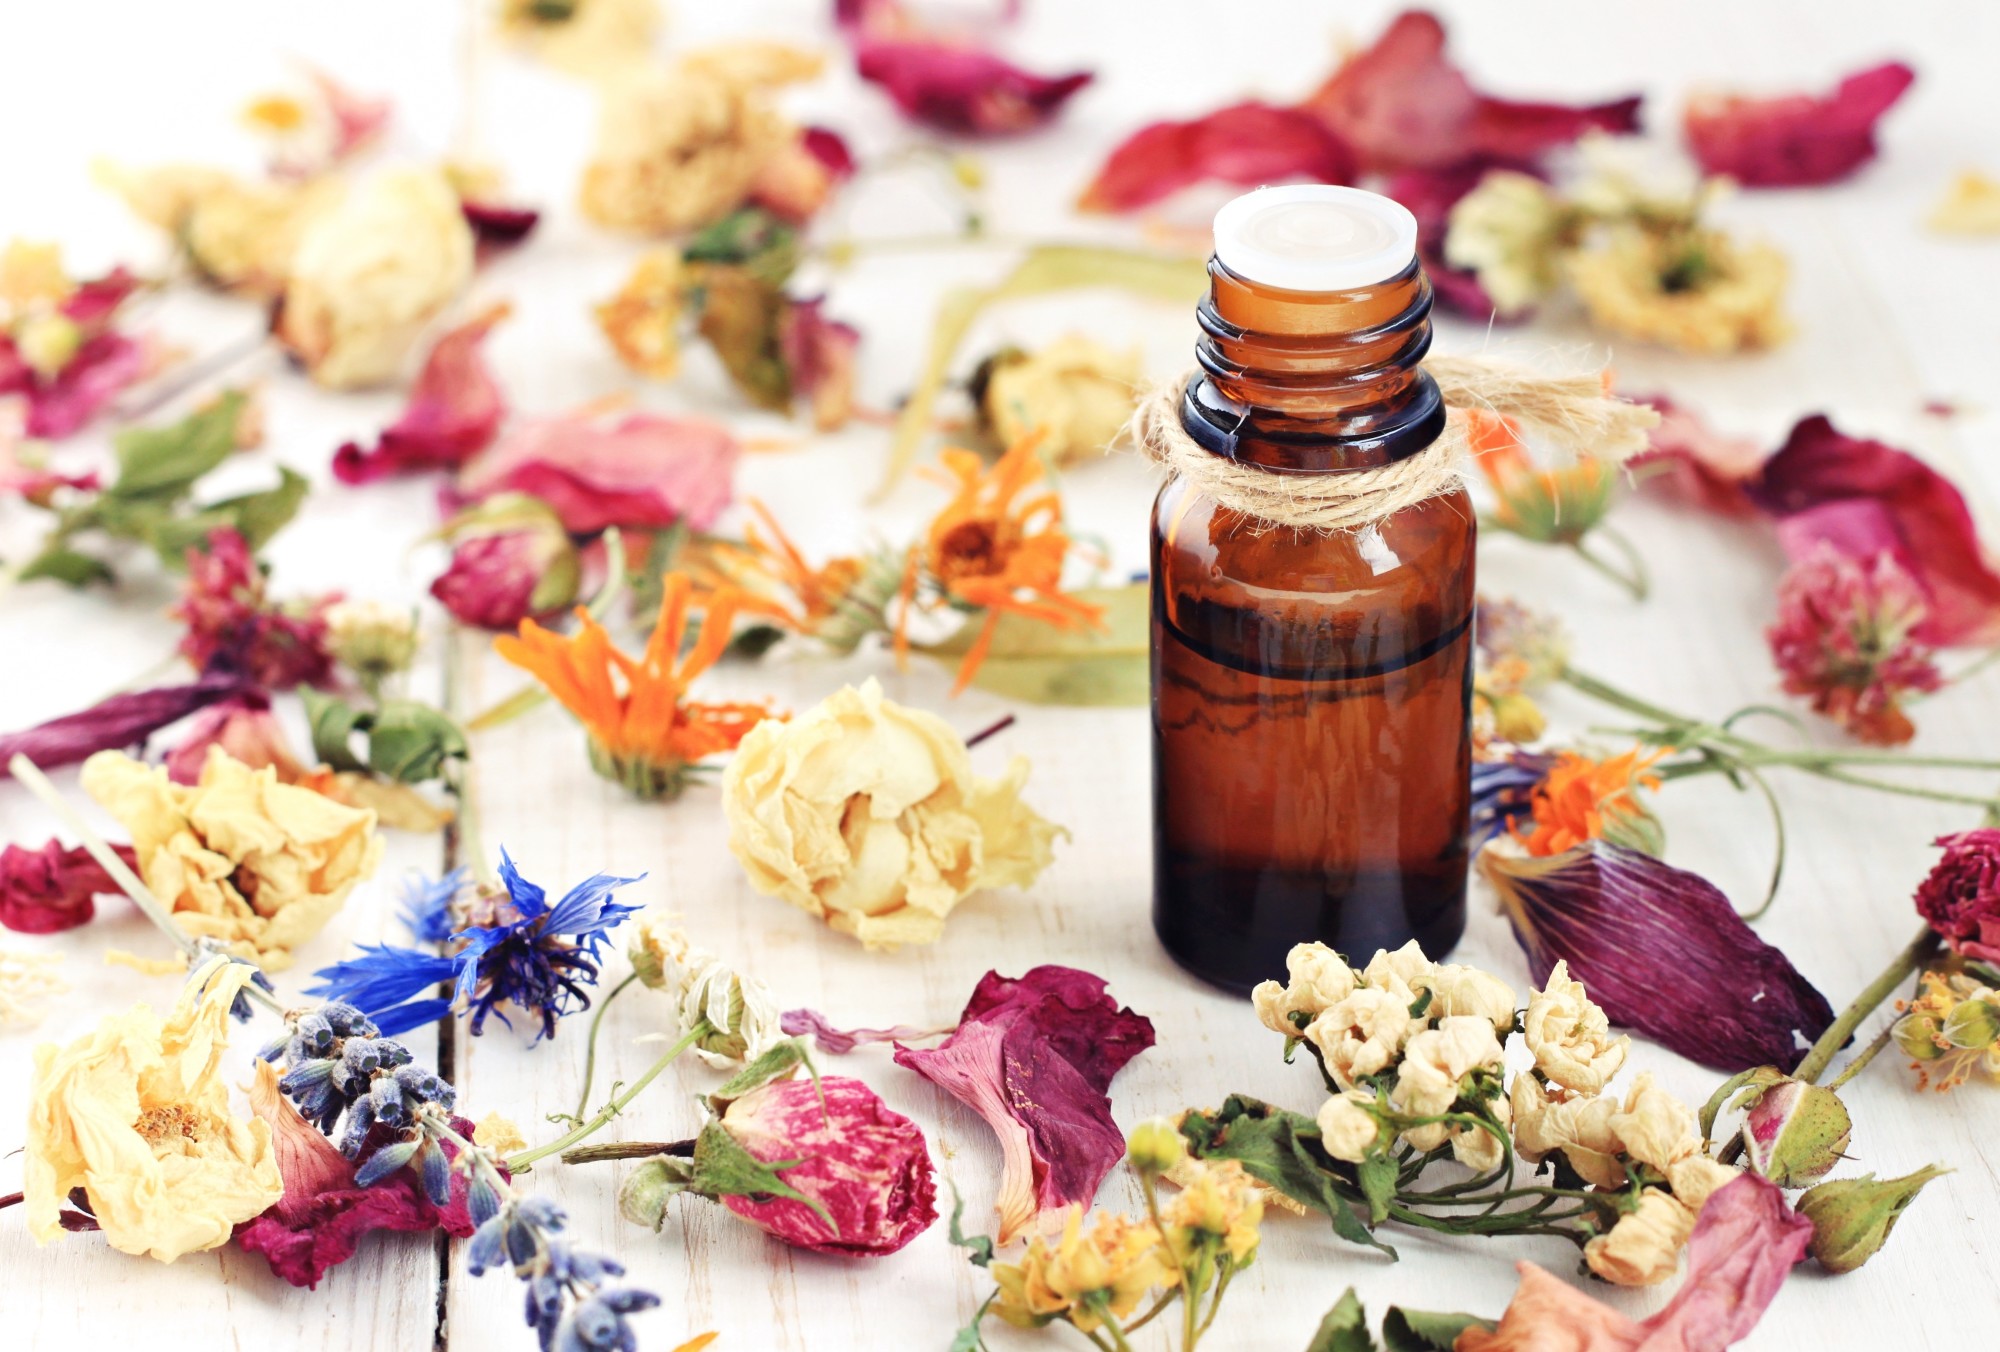 How to Mix Essential Oils for Skin and all the Benefits?